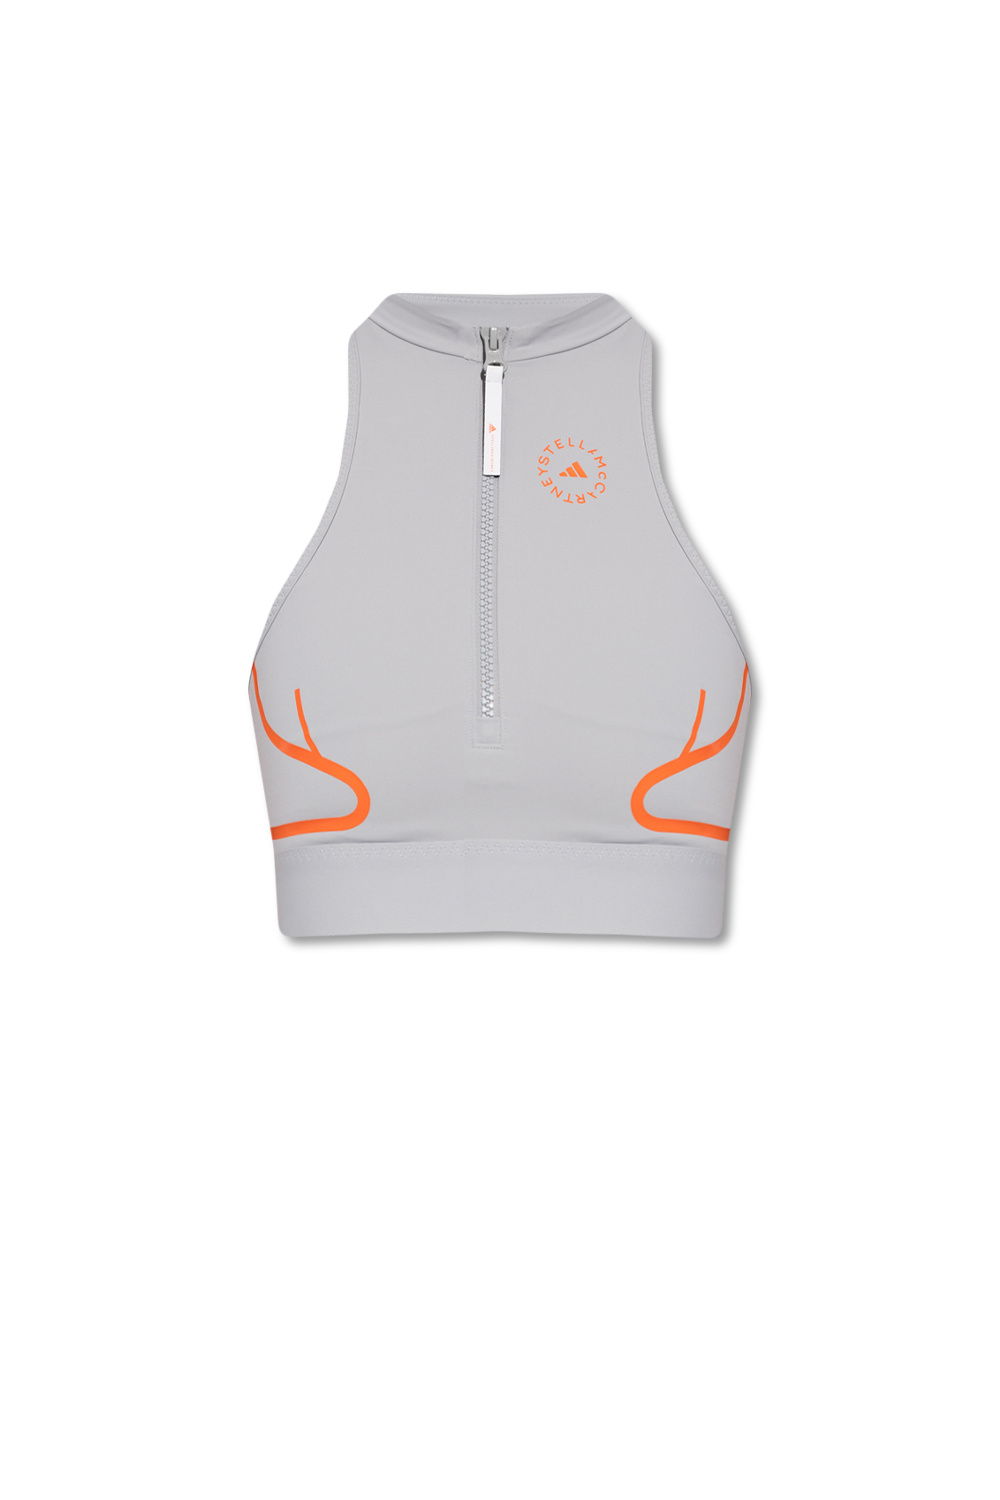 adidas cher by Stella McCartney Swimsuit top